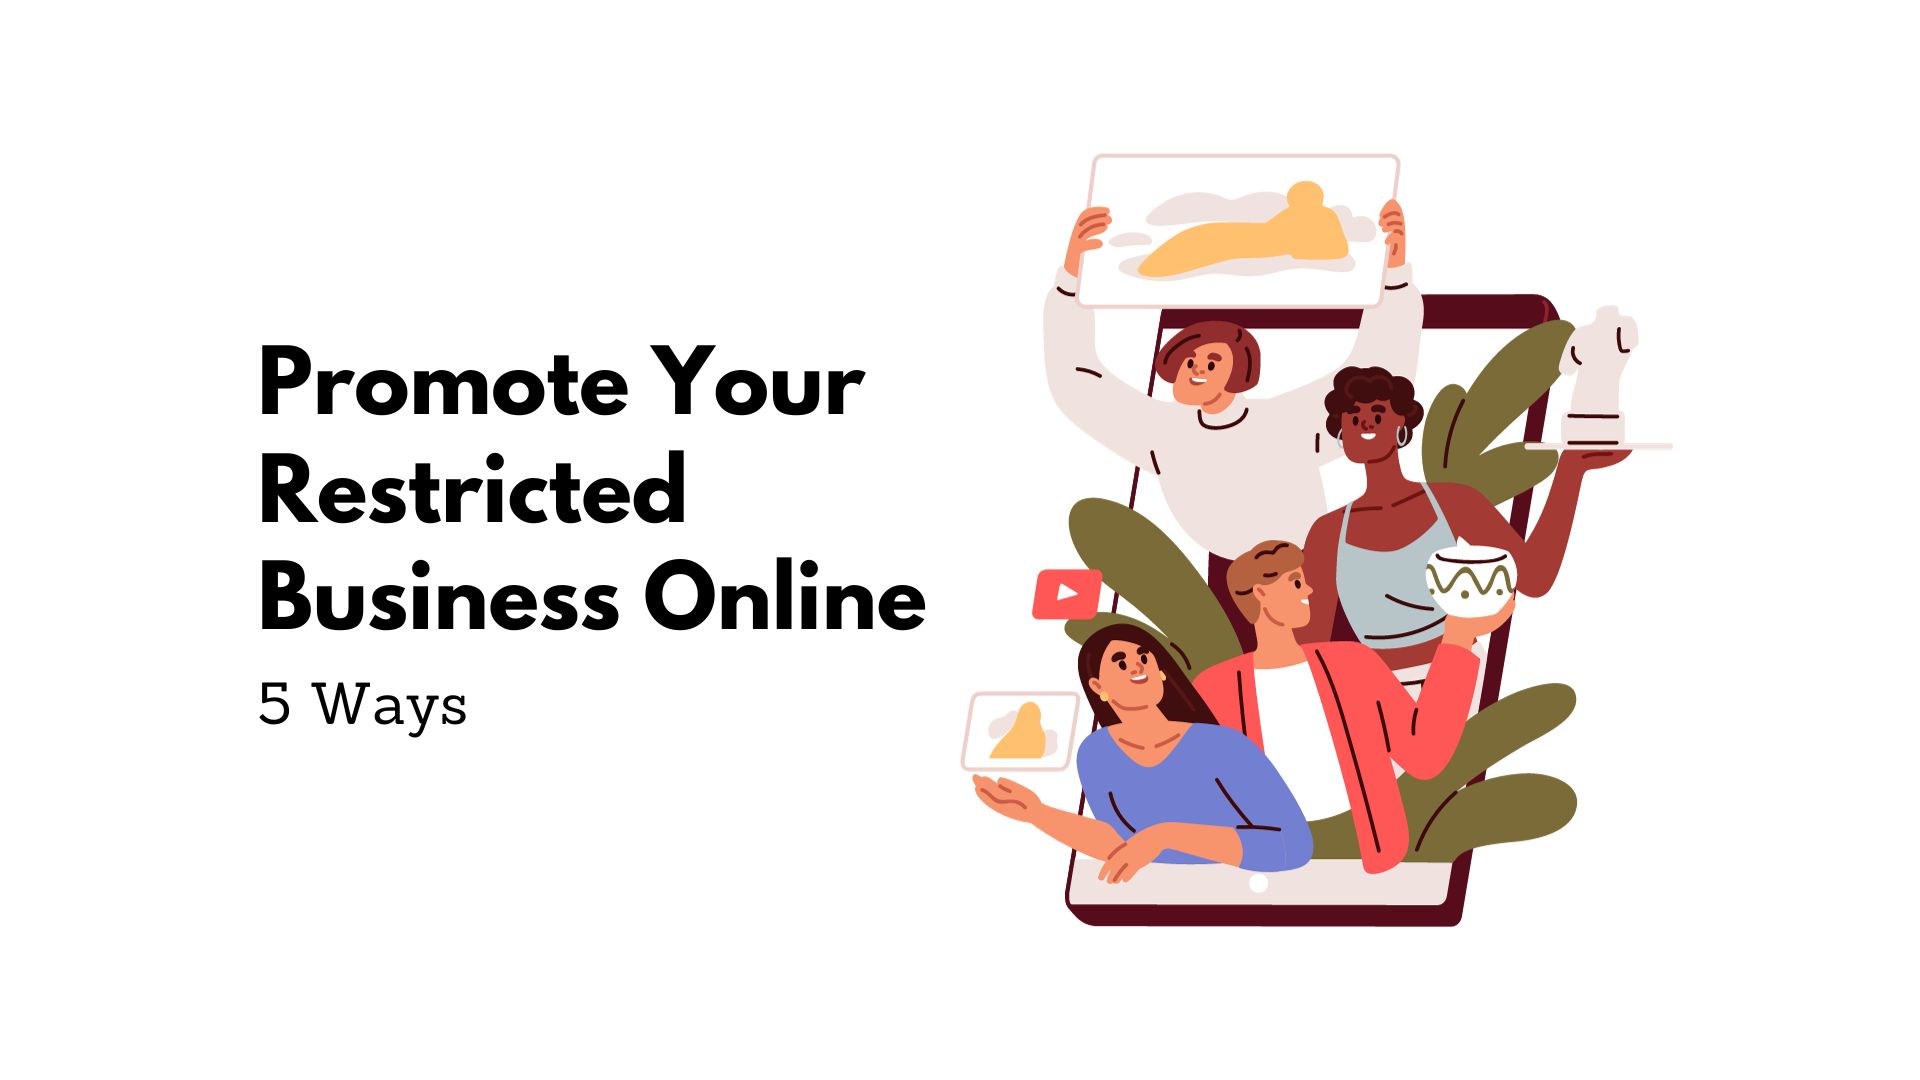 5 Ways To Promote Your Restricted Business Online